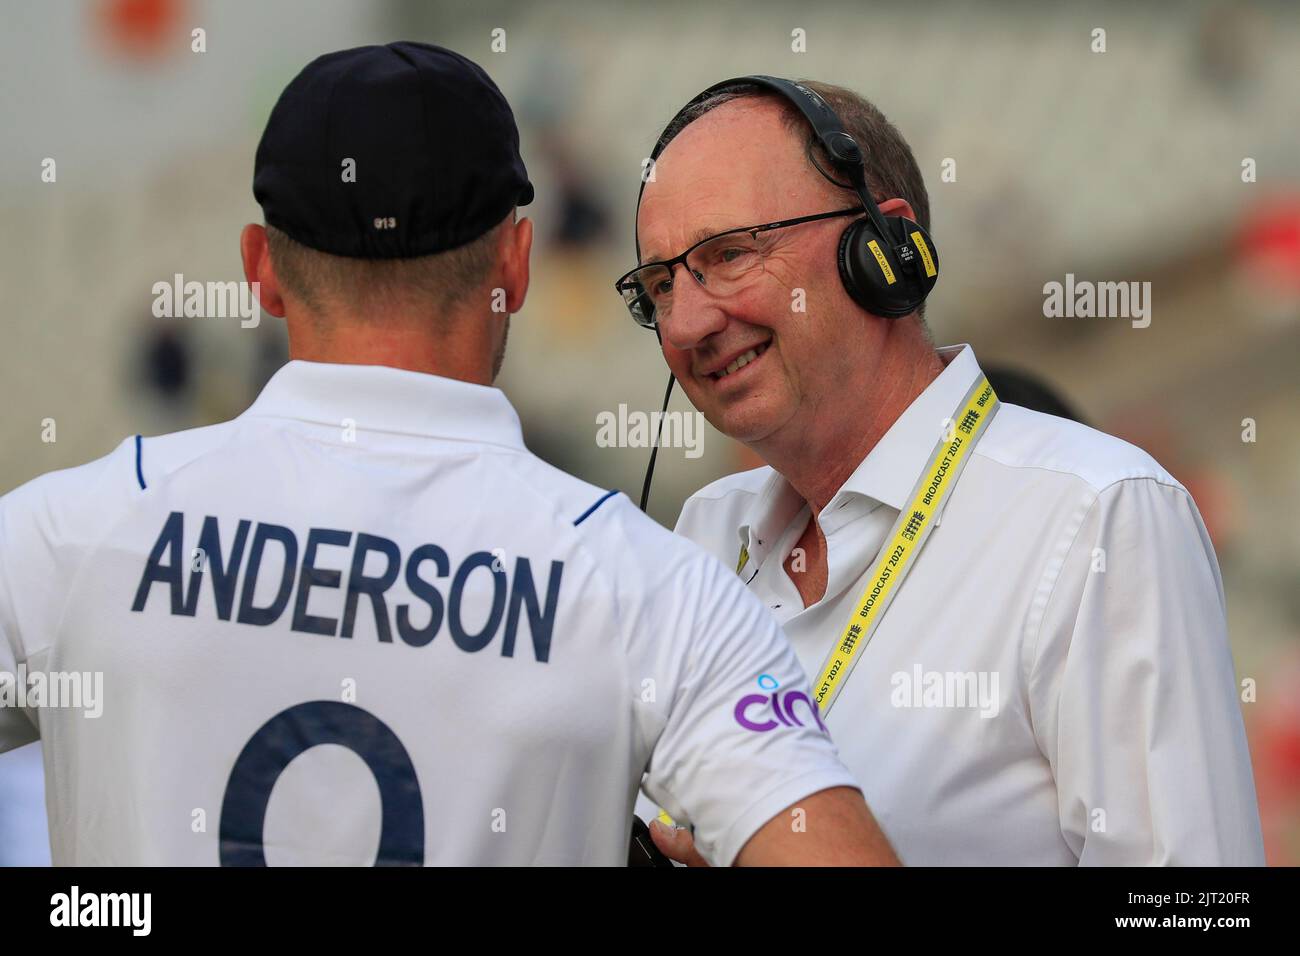 Manchester, UK. 27th Aug, 2022. Jonathan Agnew of Test Match Special interviews James Anderson of England after the match in Manchester, United Kingdom on 8/27/2022. (Photo by Conor Molloy/News Images/Sipa USA) Credit: Sipa USA/Alamy Live News Stock Photo